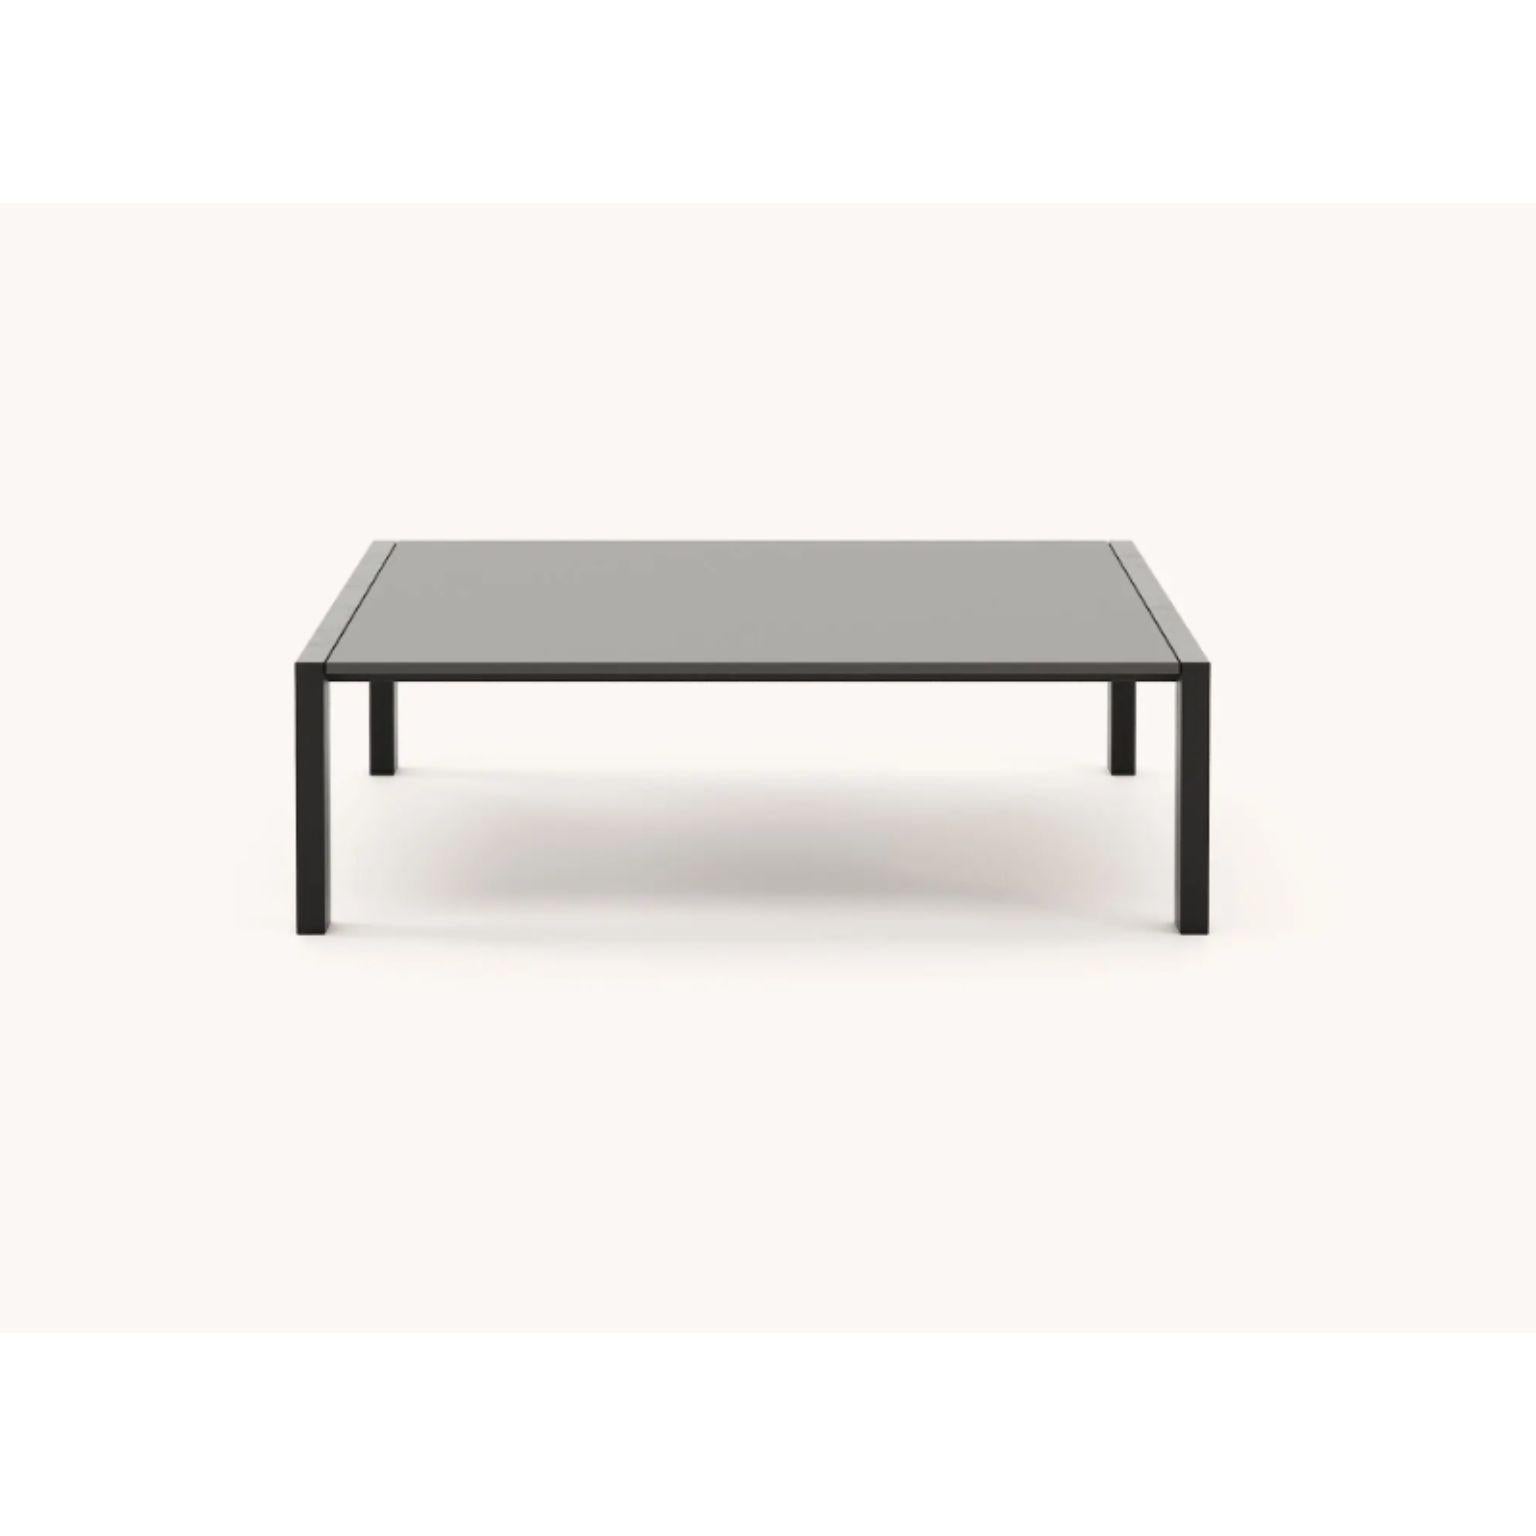 Bondi coffee table by Domkapa.
Materials: black texturized steel, grey lacquered.
Dimensions: W 95 x D 95 x H 25 cm.
Also available in different materials. 

Bondi coffee table creates a warm atmosphere for memorable summers. A simple piece